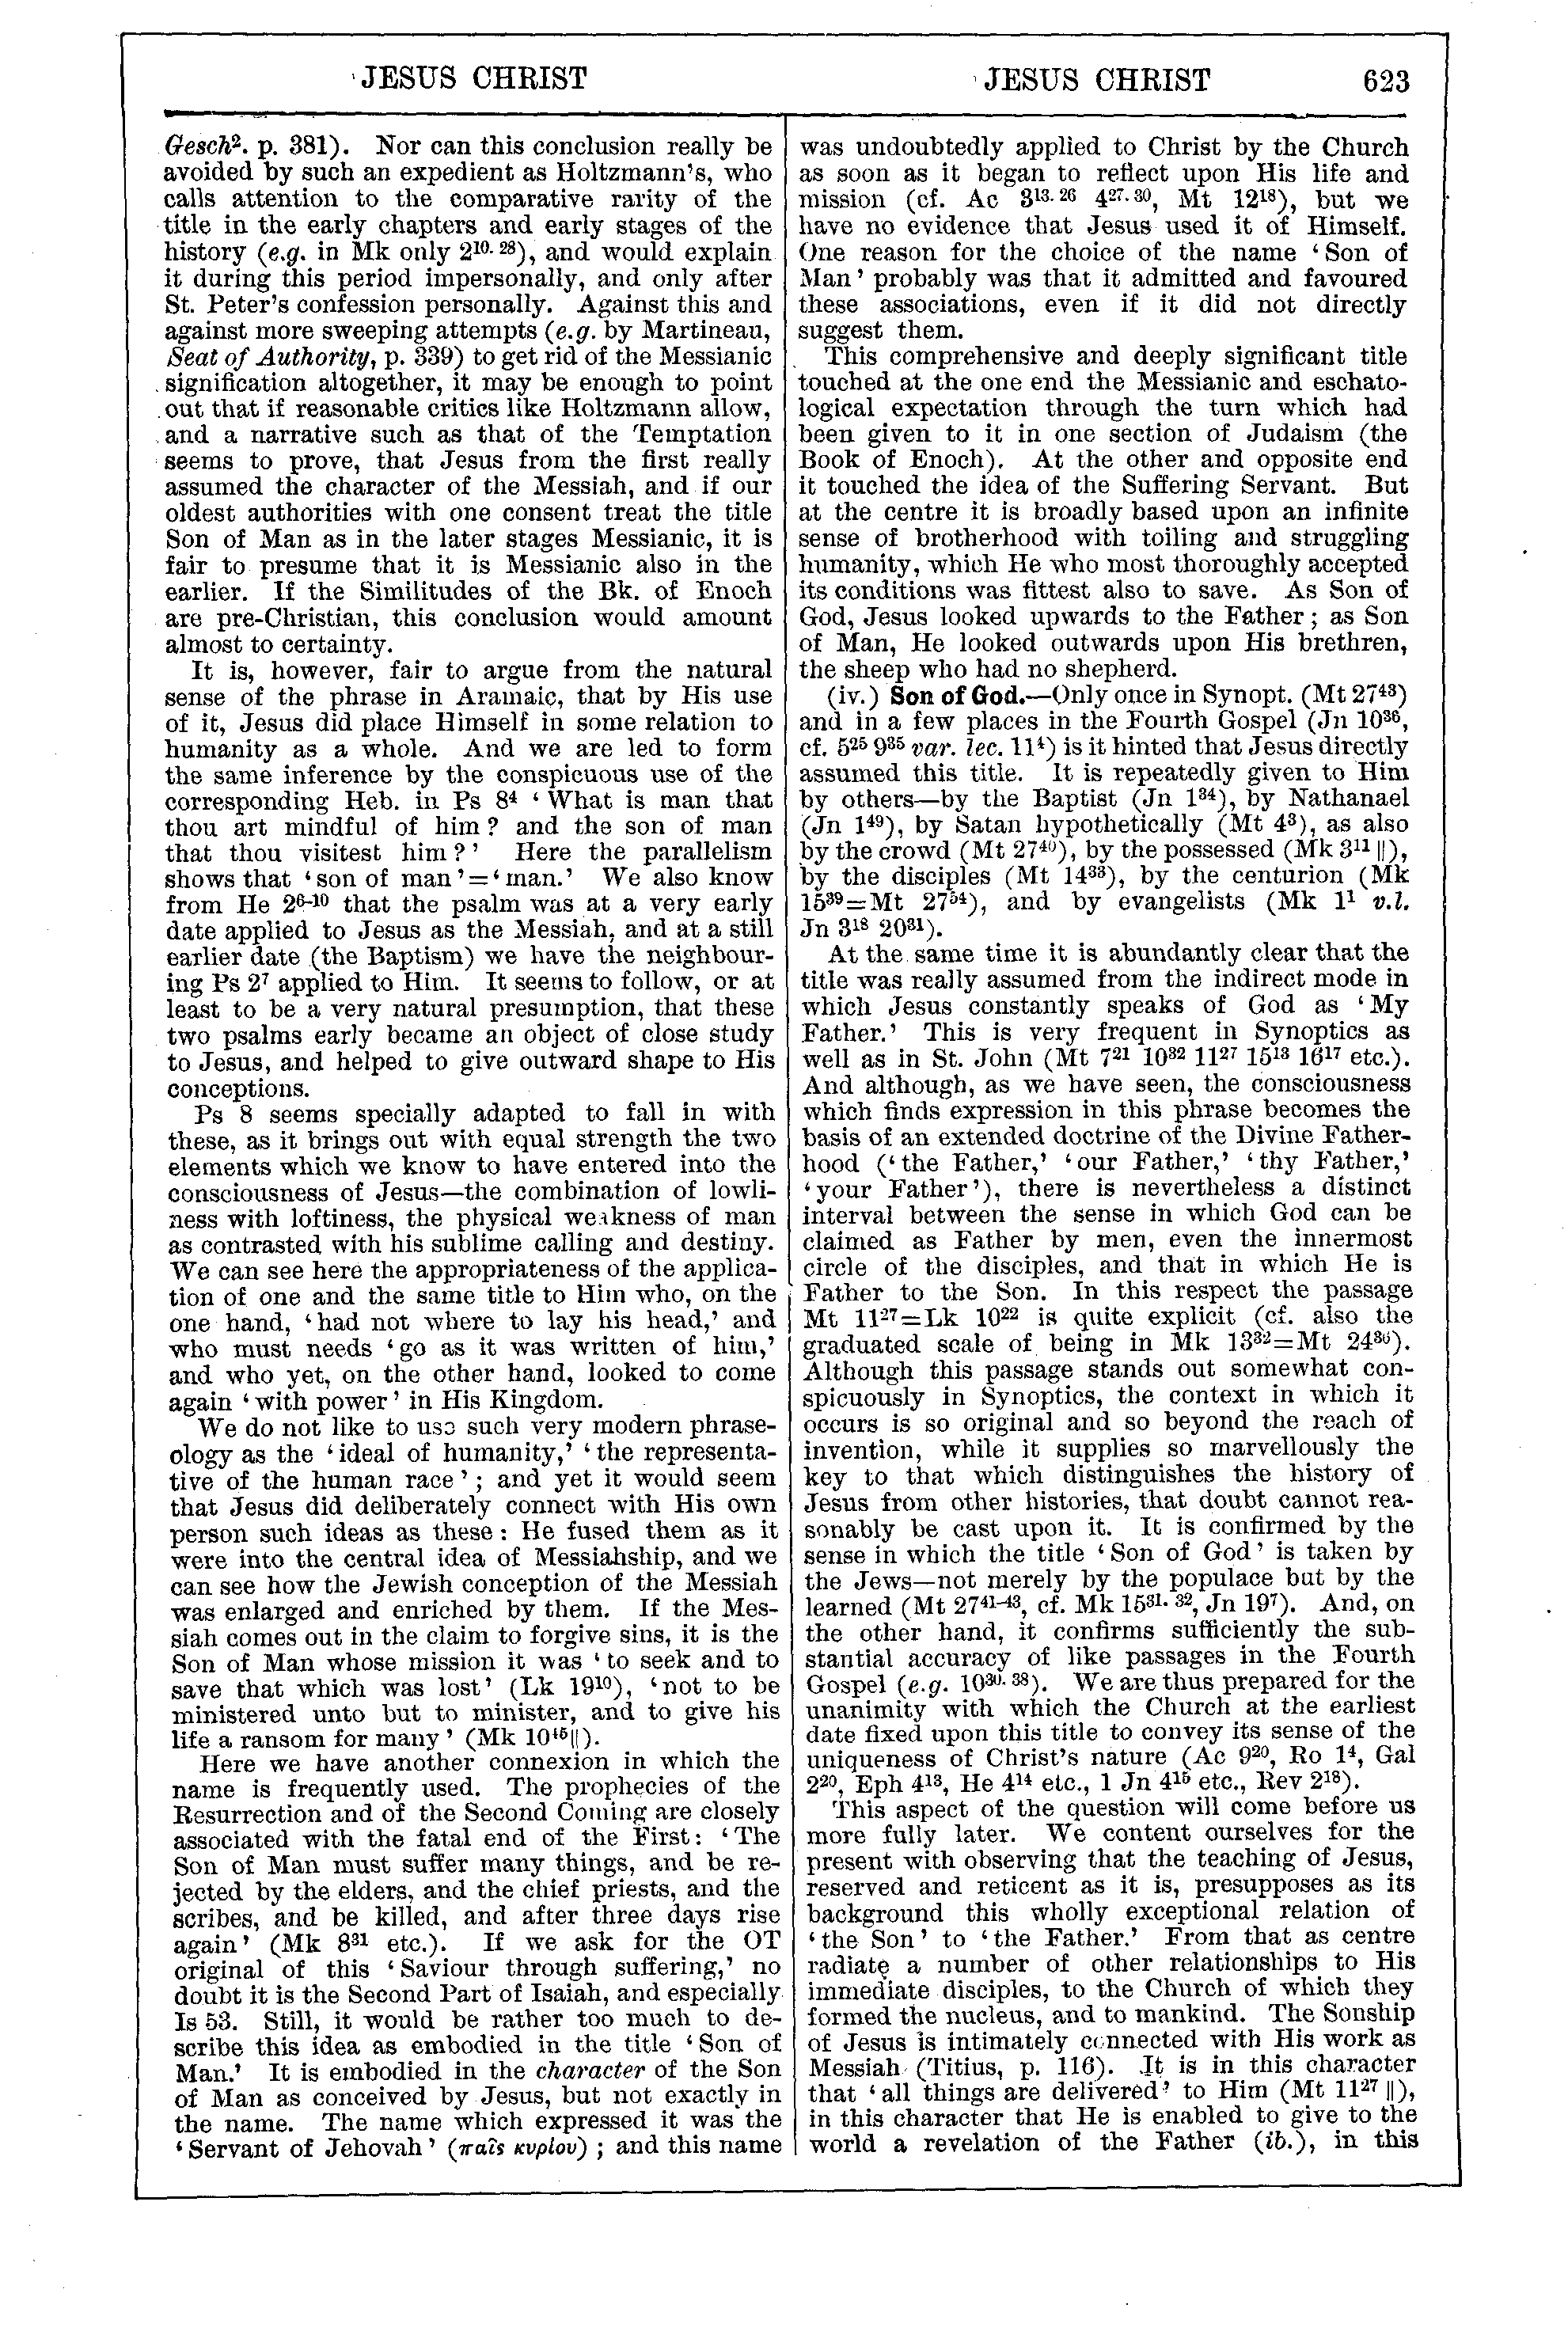 Image of page 623